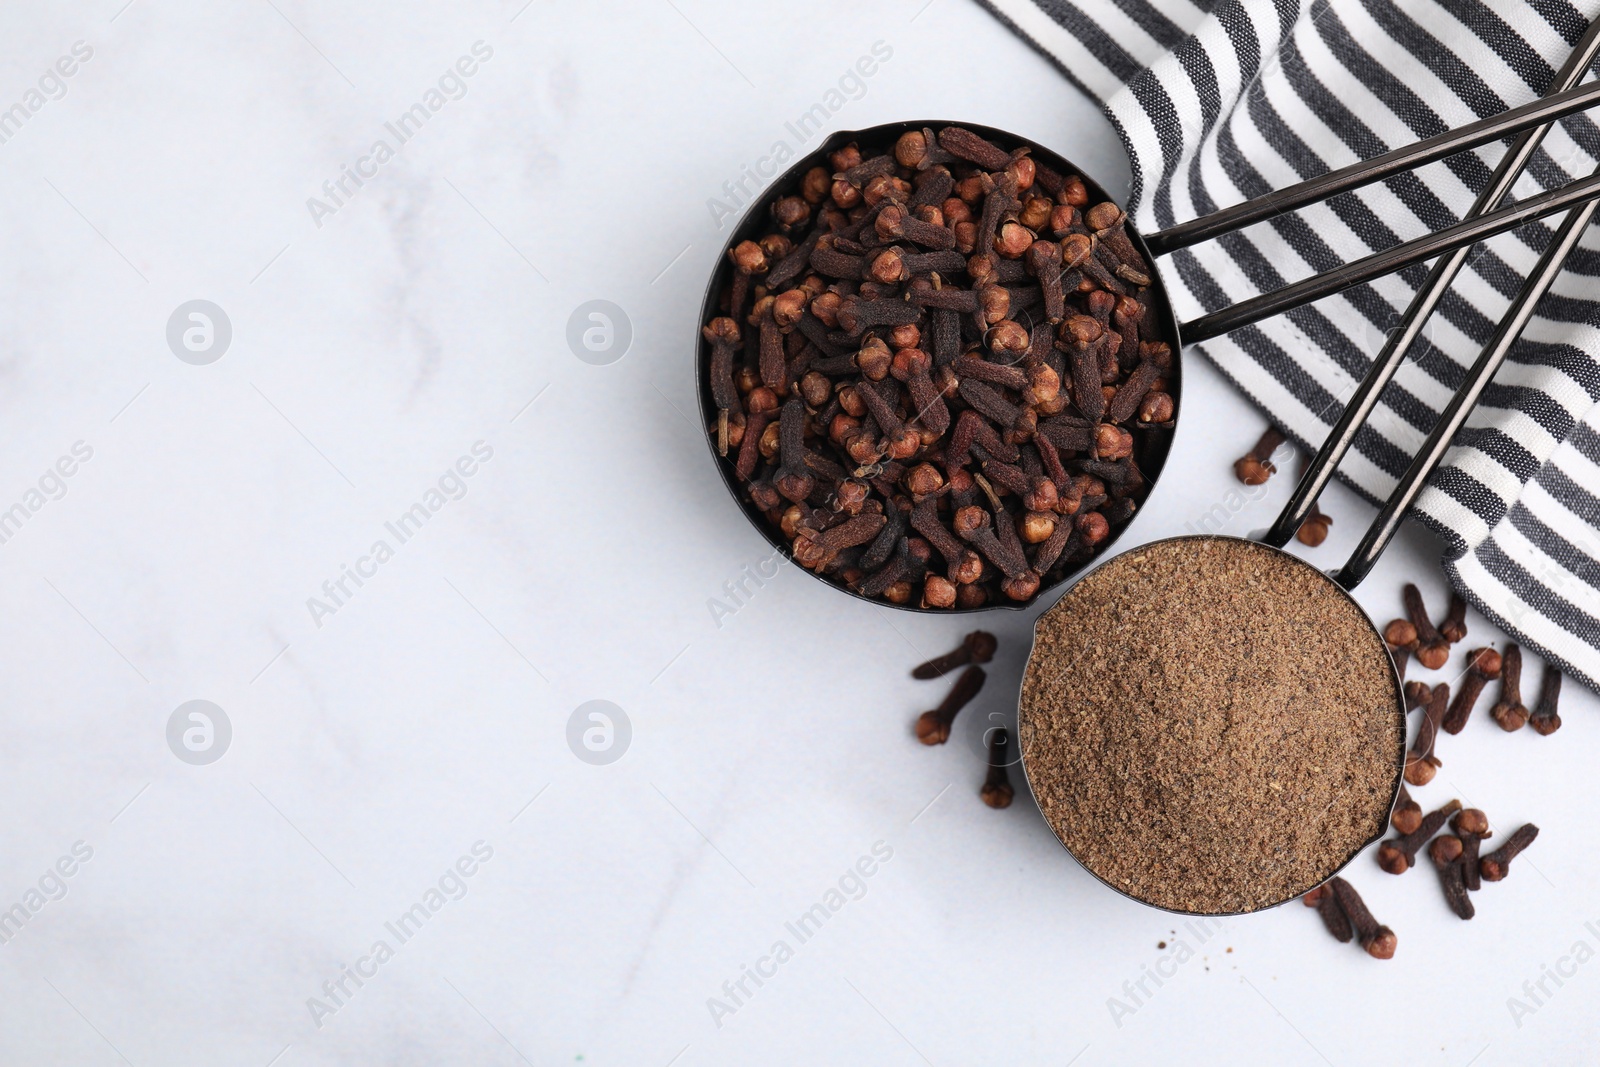 Photo of Aromatic clove powder and dried buds in scoops on white table, top view. Space for text